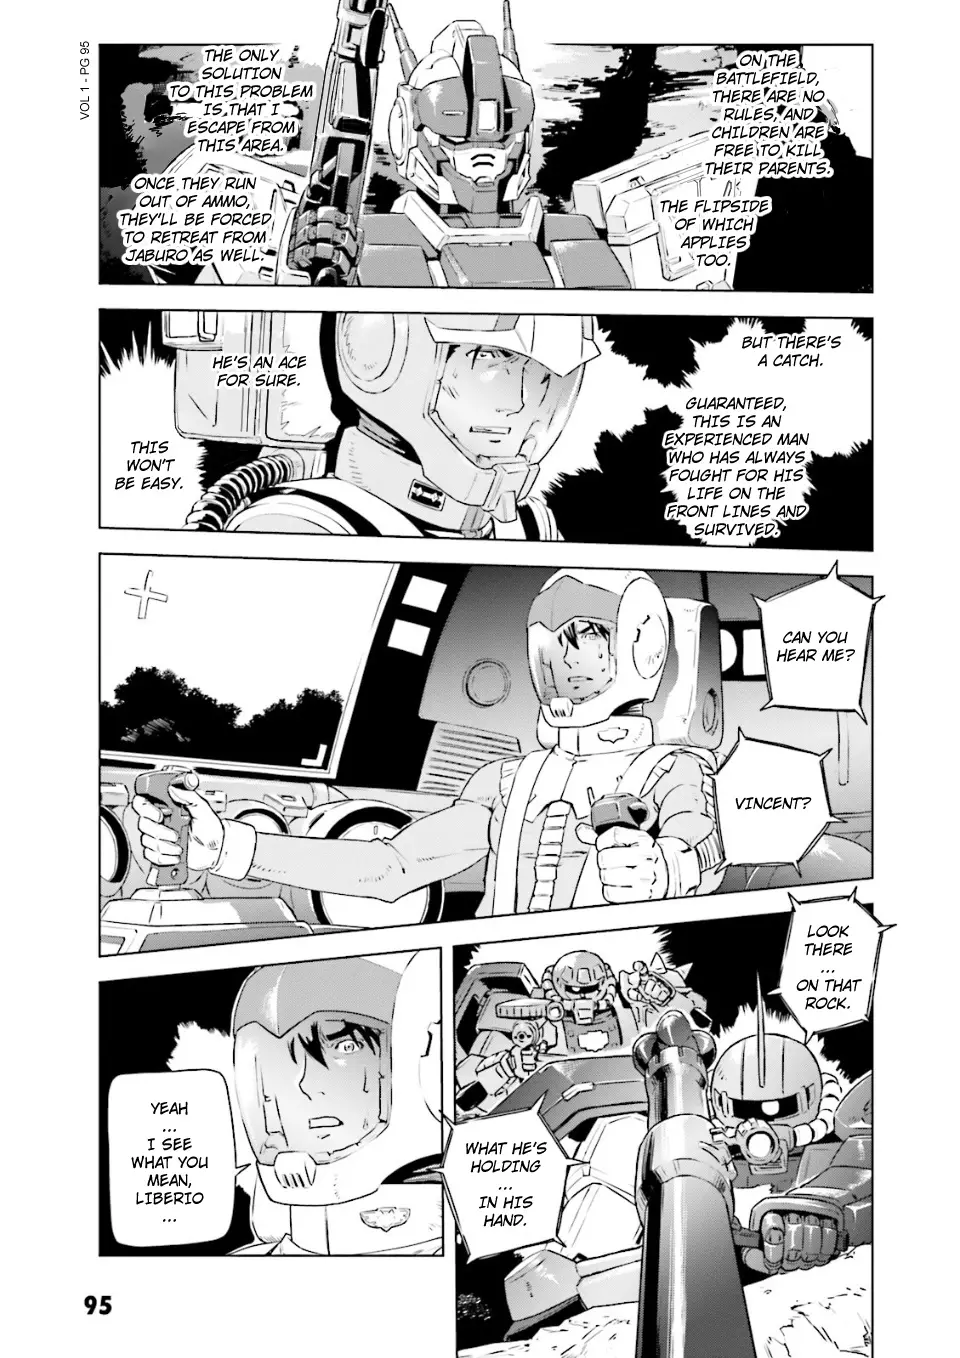 Mobile Suit Gundam Side Story - Missing Link - 4 page 3-3fbaaab2